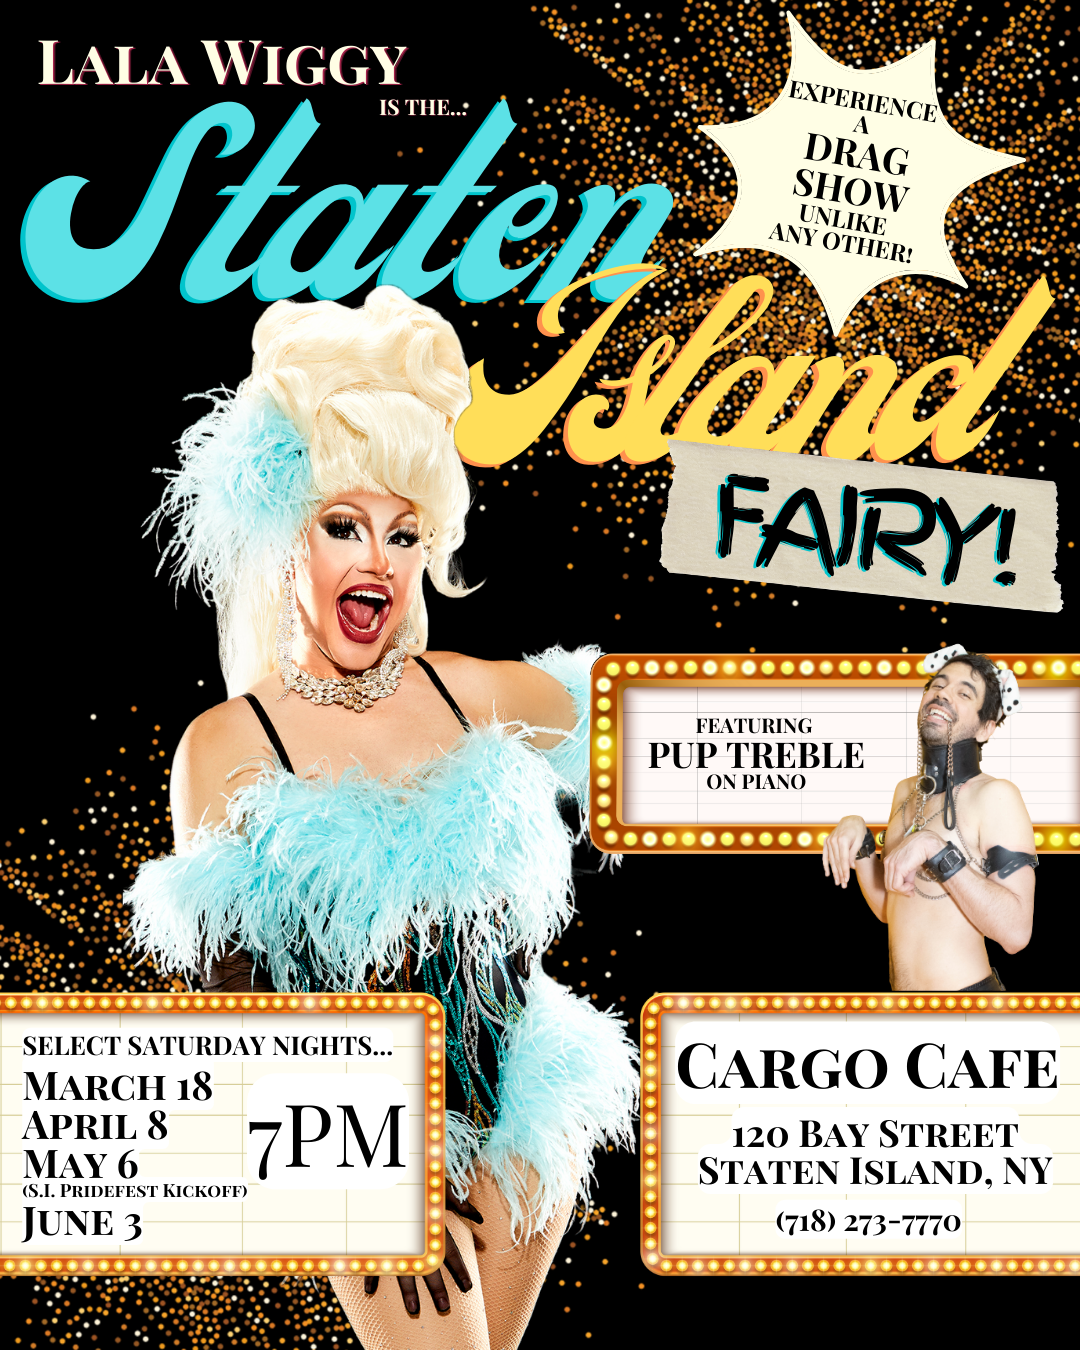 Staten Island Drag Show at Cargo Cafe